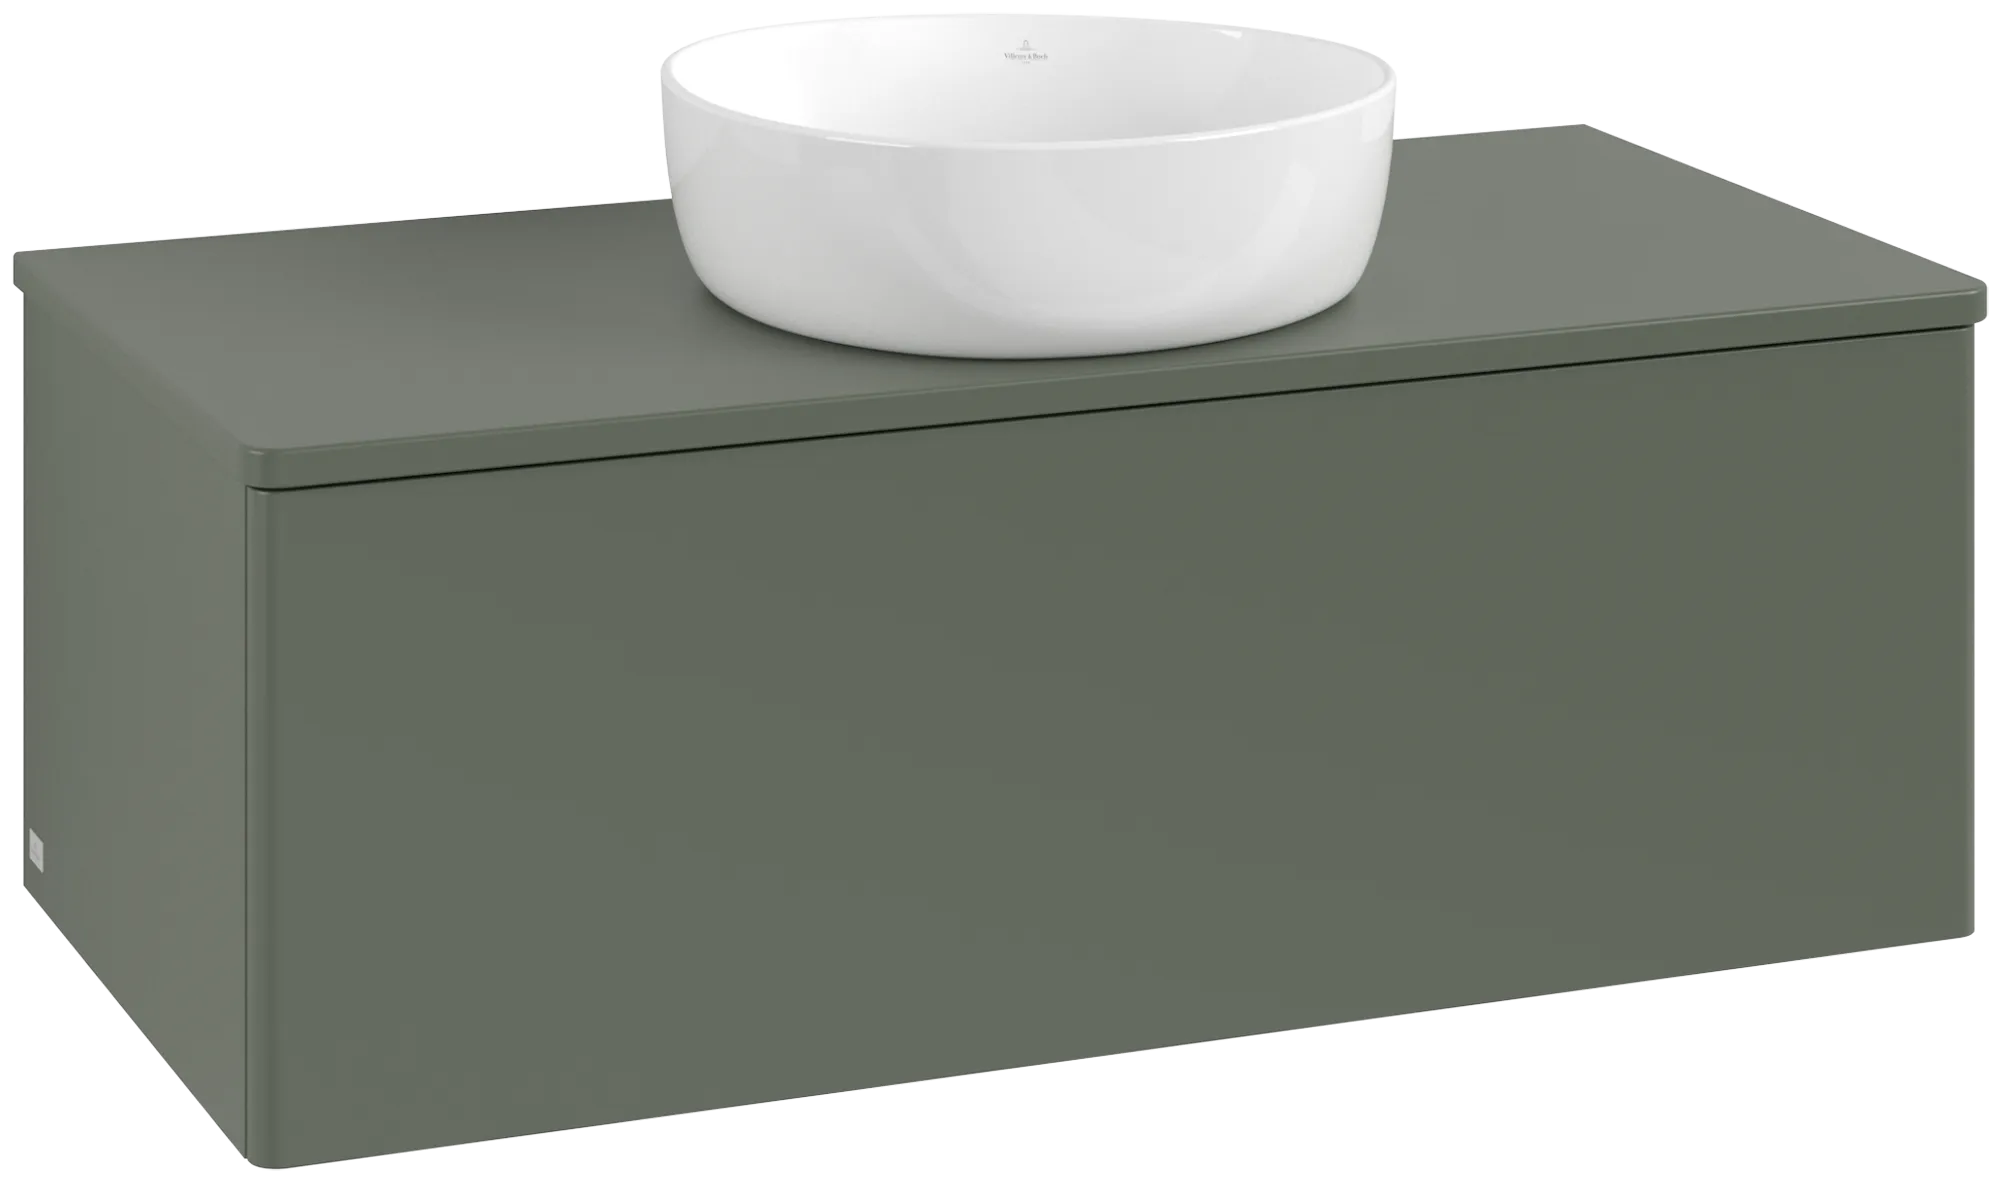 Obrázek VILLEROY BOCH Antao Vanity unit, 1 pull-out compartment, 1000 x 360 x 500 mm, Front without structure, Leaf Green Matt Lacquer / Leaf Green Matt Lacquer #K31010HL